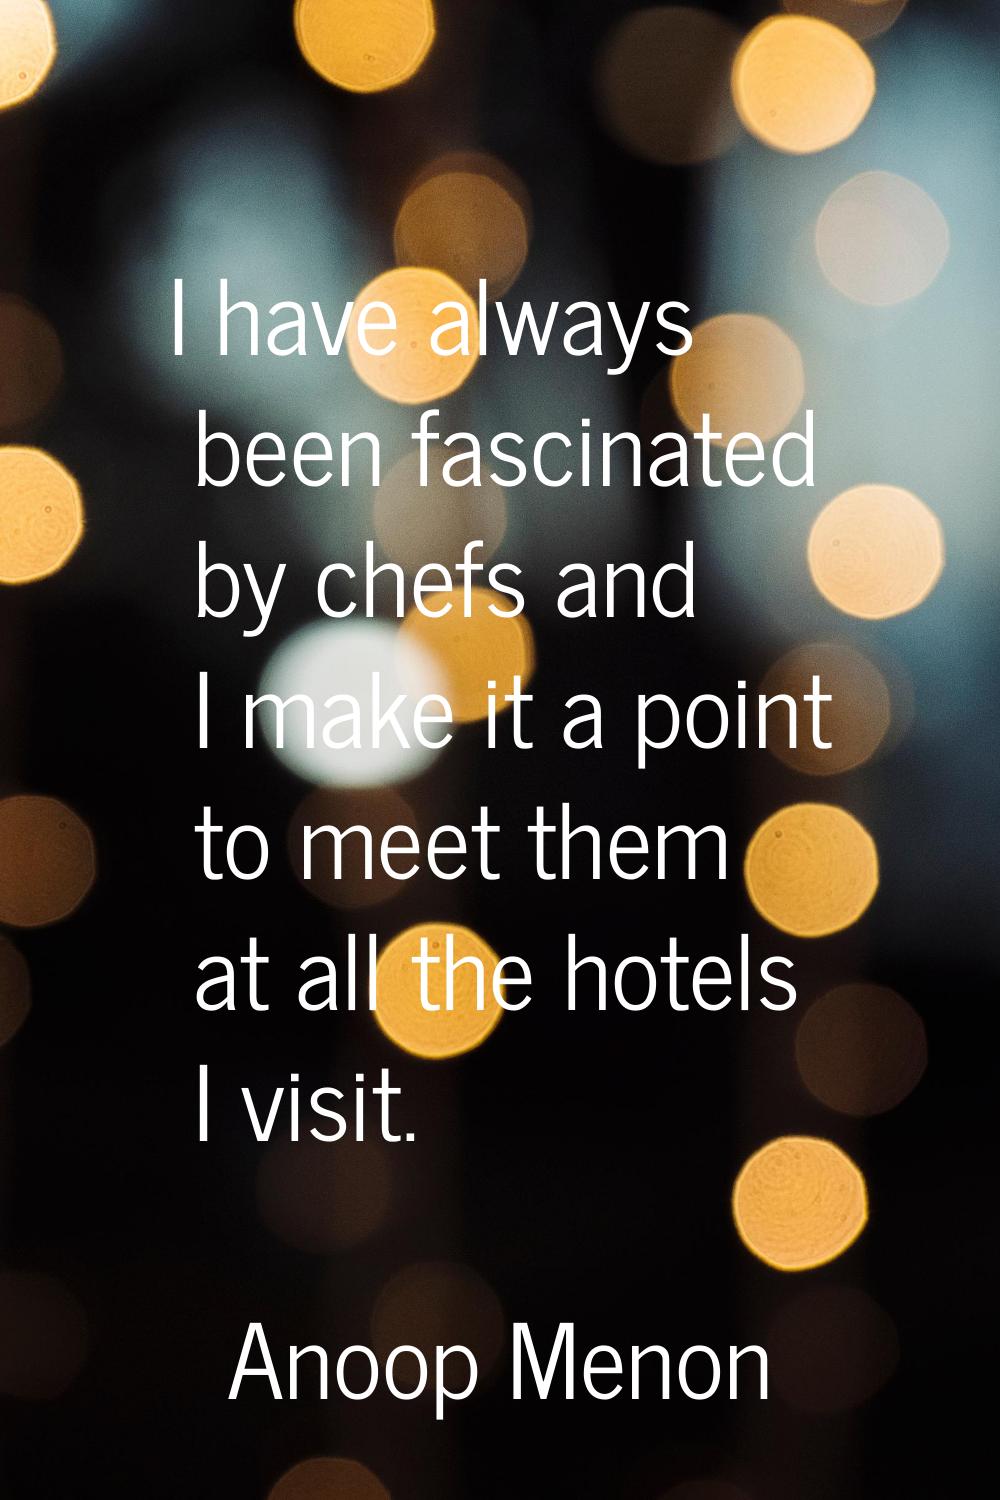 I have always been fascinated by chefs and I make it a point to meet them at all the hotels I visit